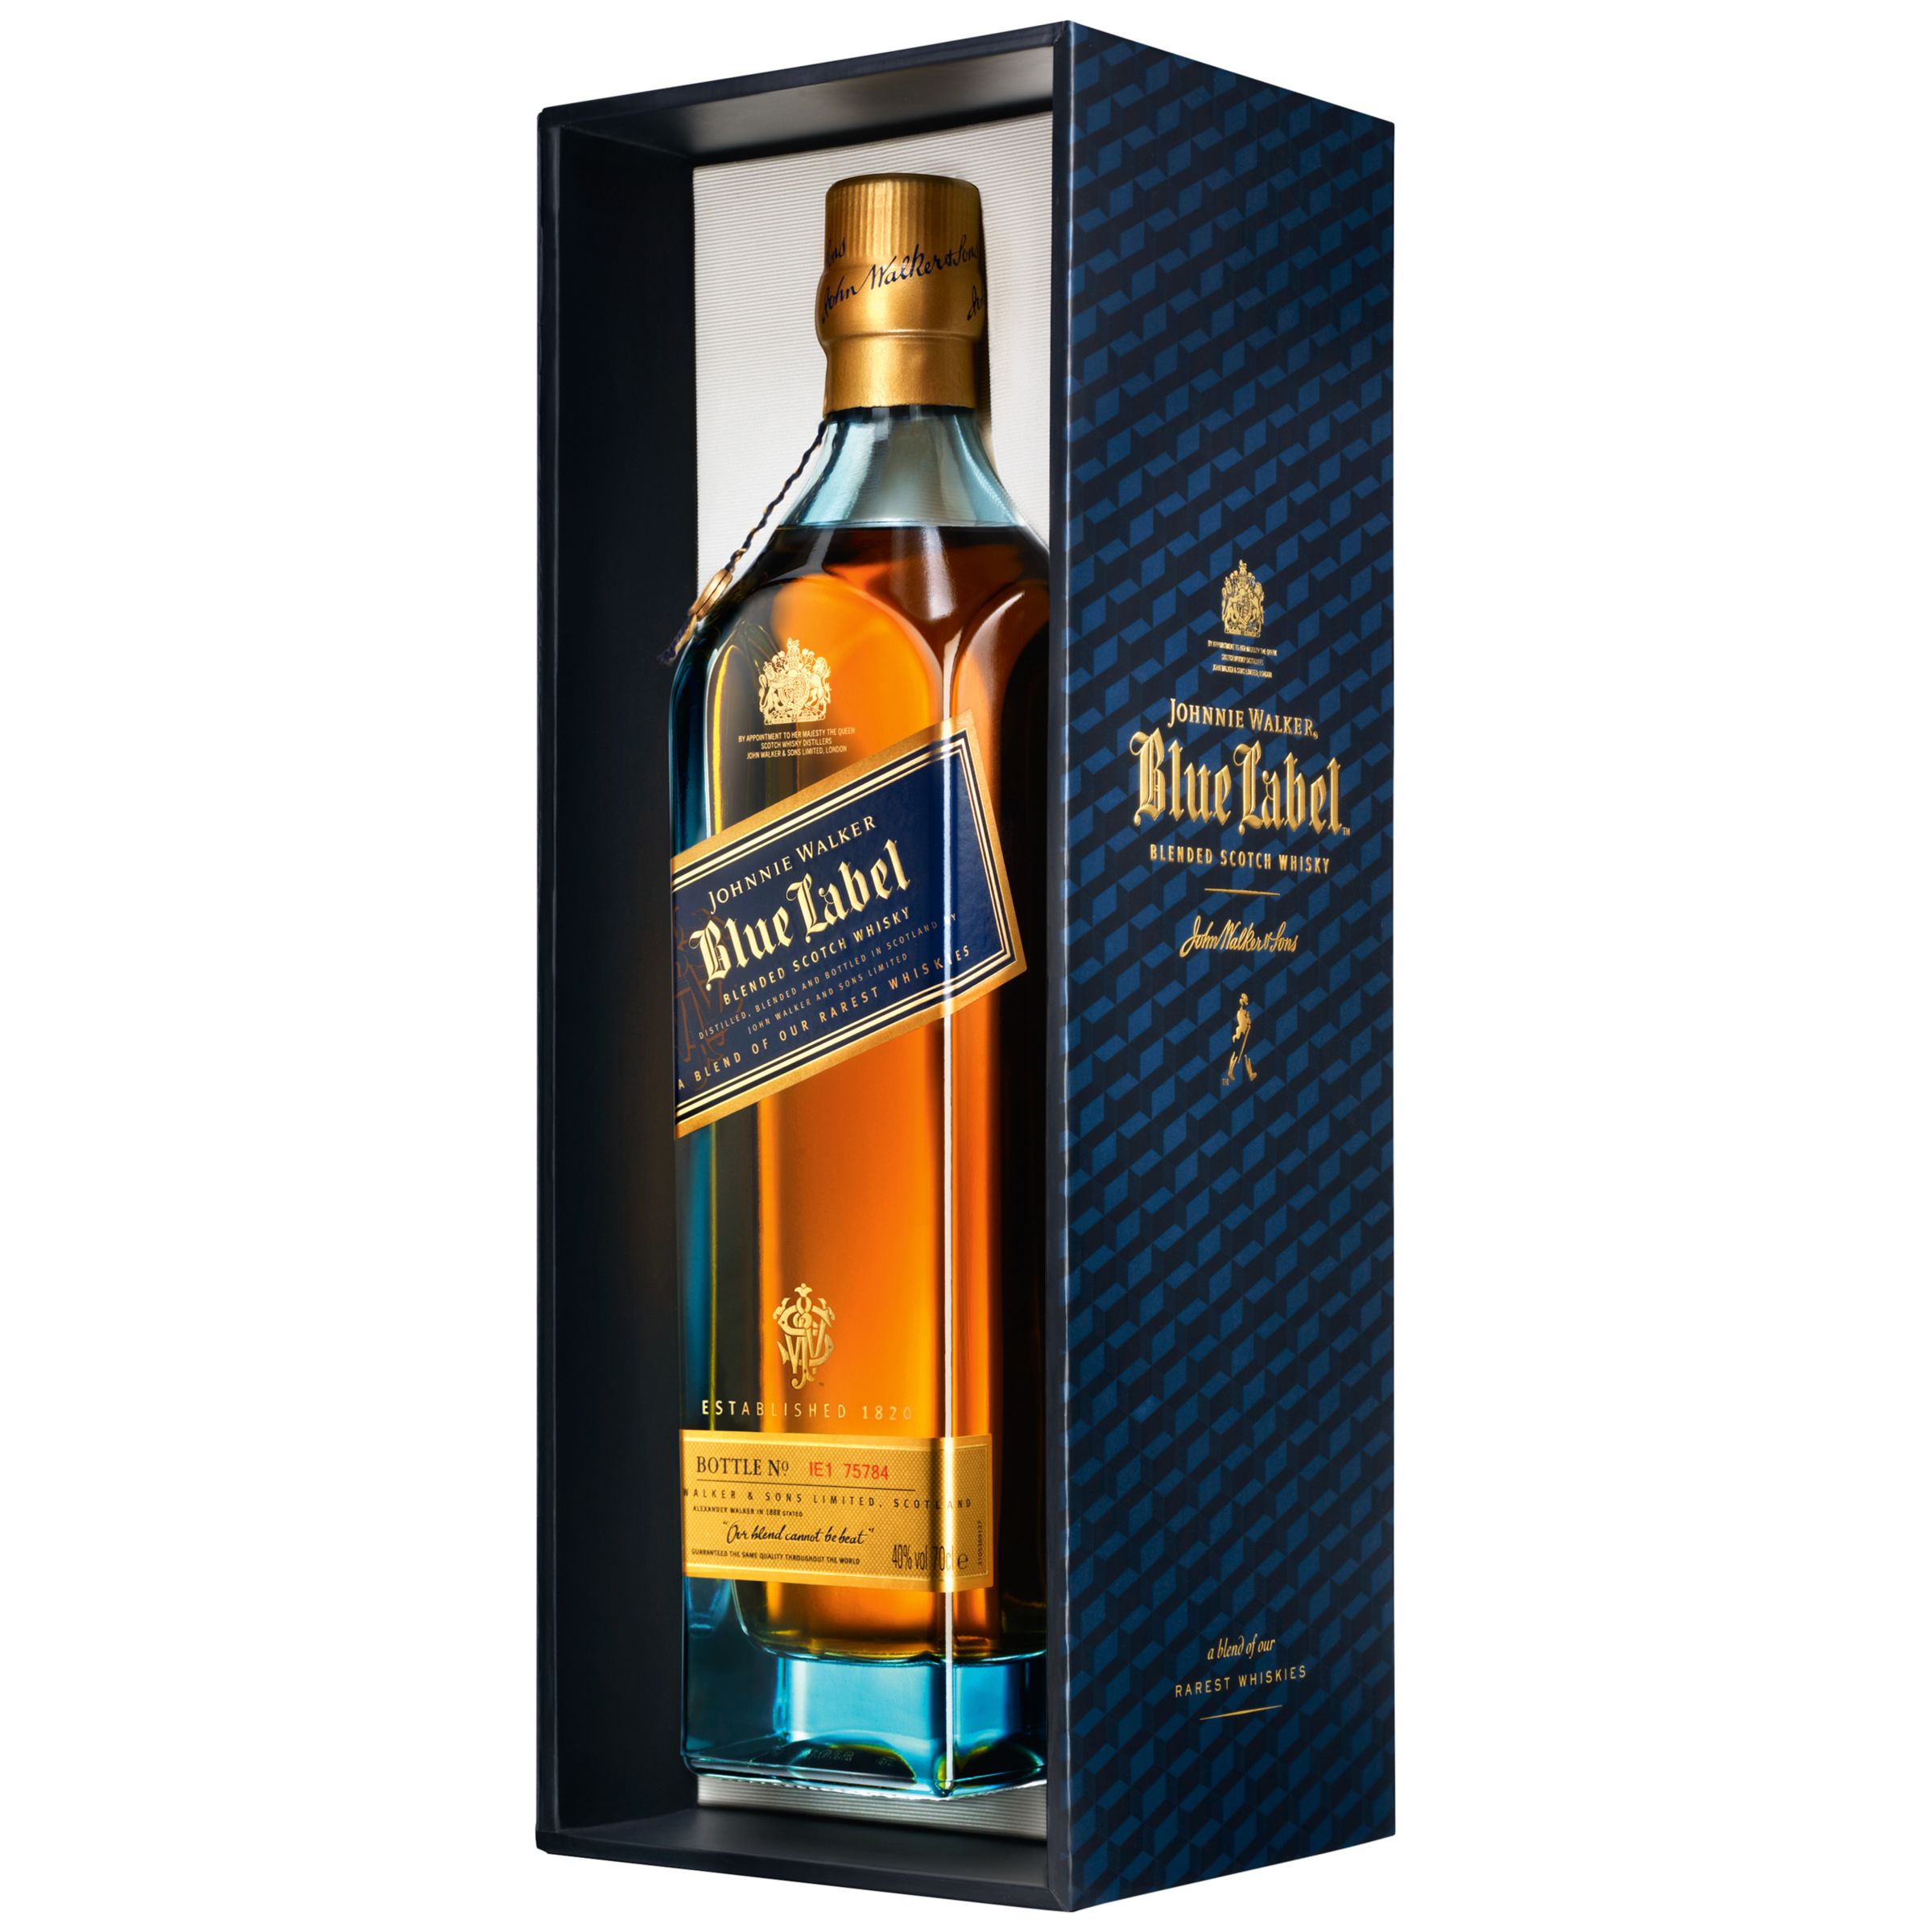 Buy cheap Johnnie walker whisky - compare Wine, Spirits